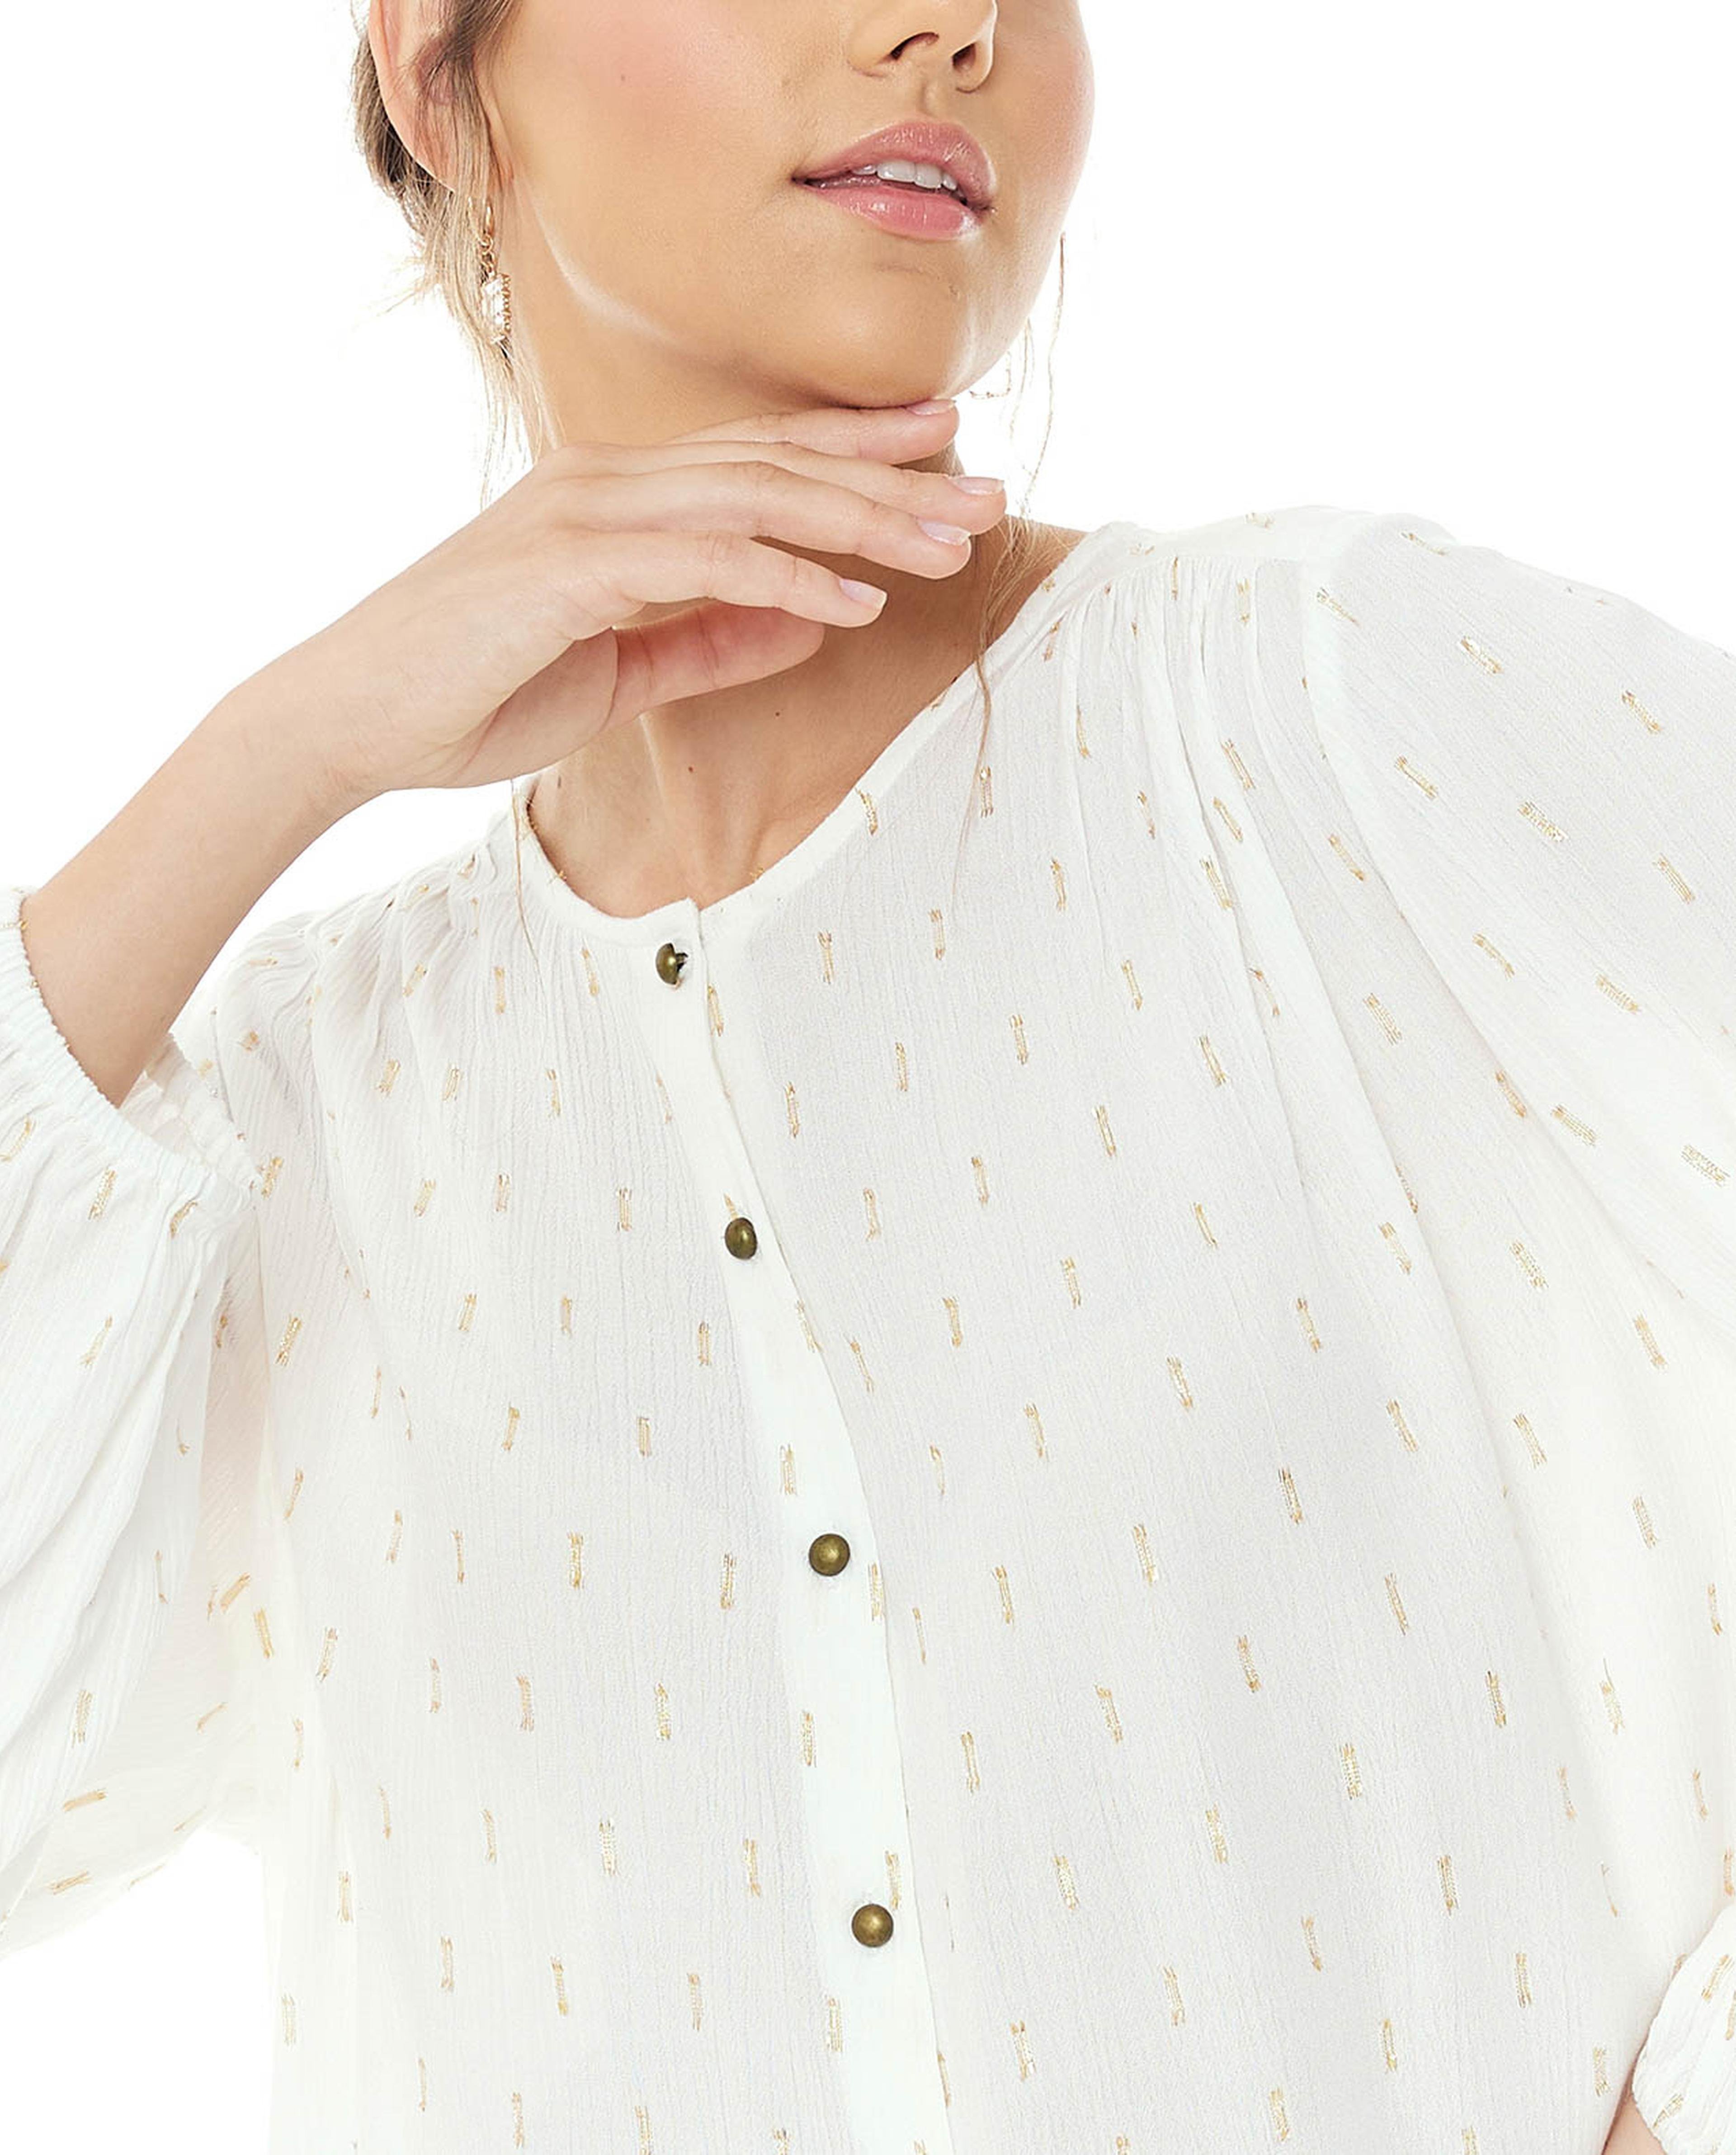 Woven Top with Round Neck and Long Sleeves